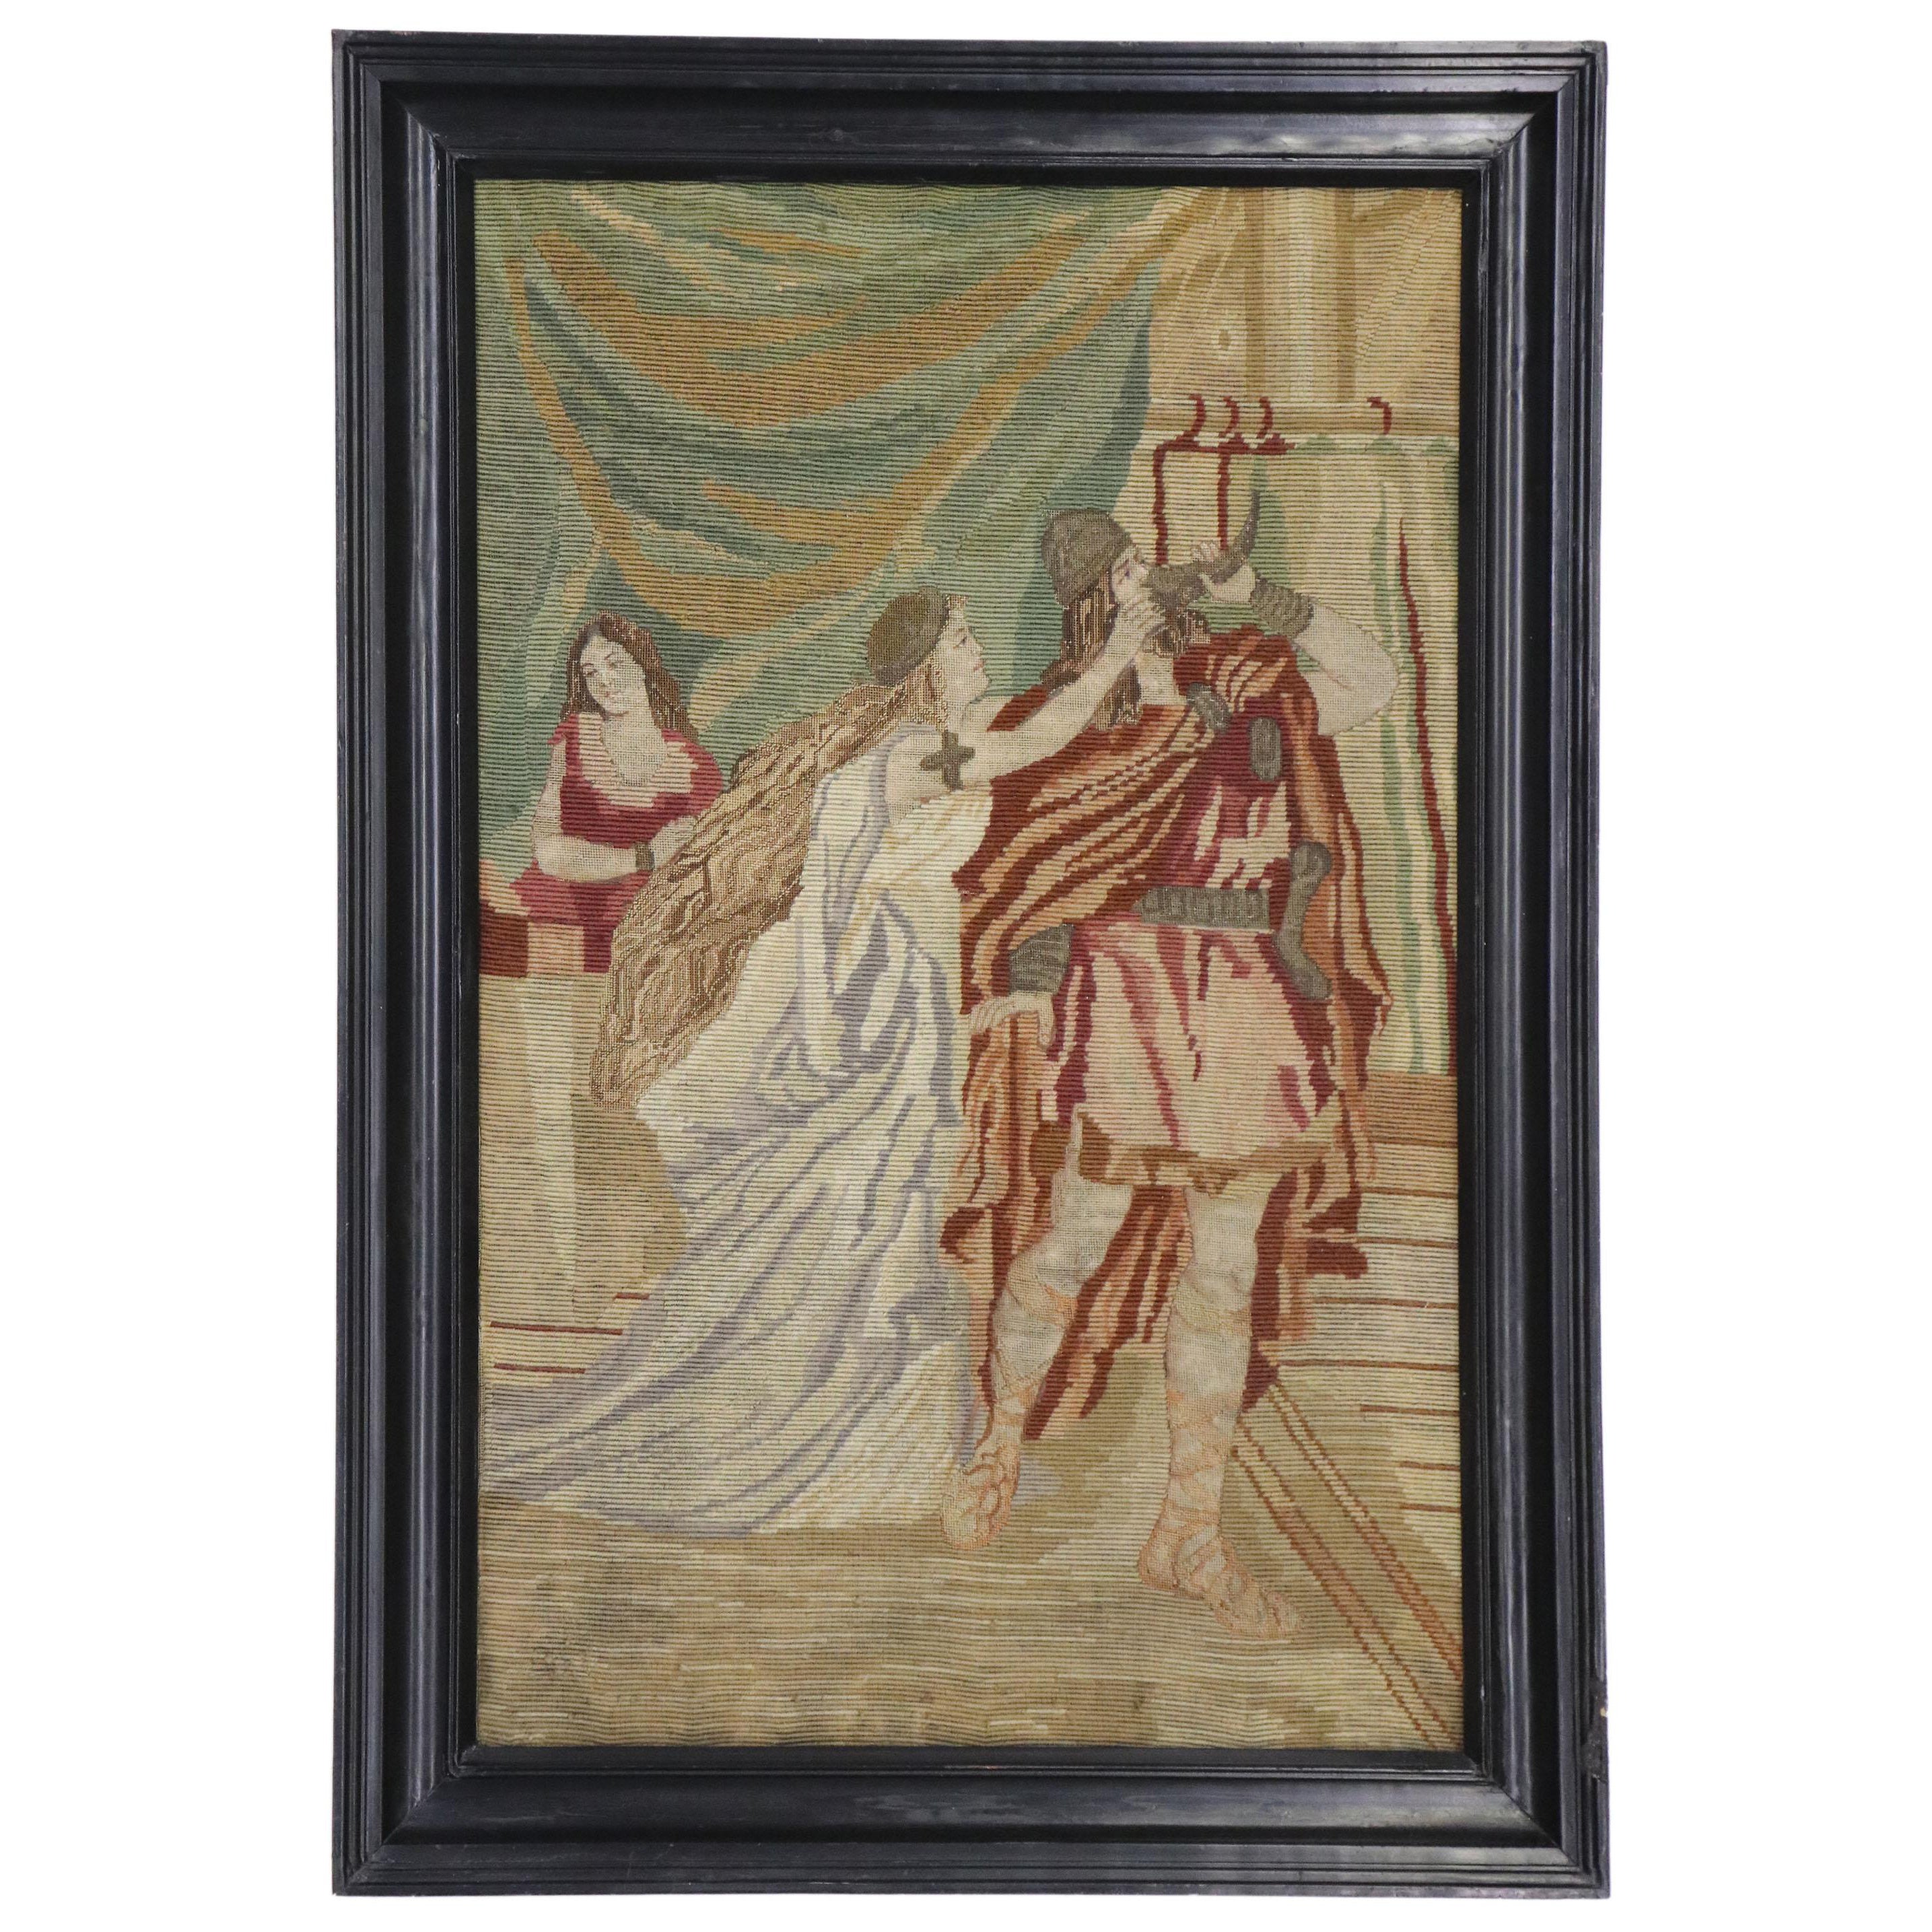 Antique English Needlepoint Tristan and Isolde Tapestry with Medieval Style For Sale